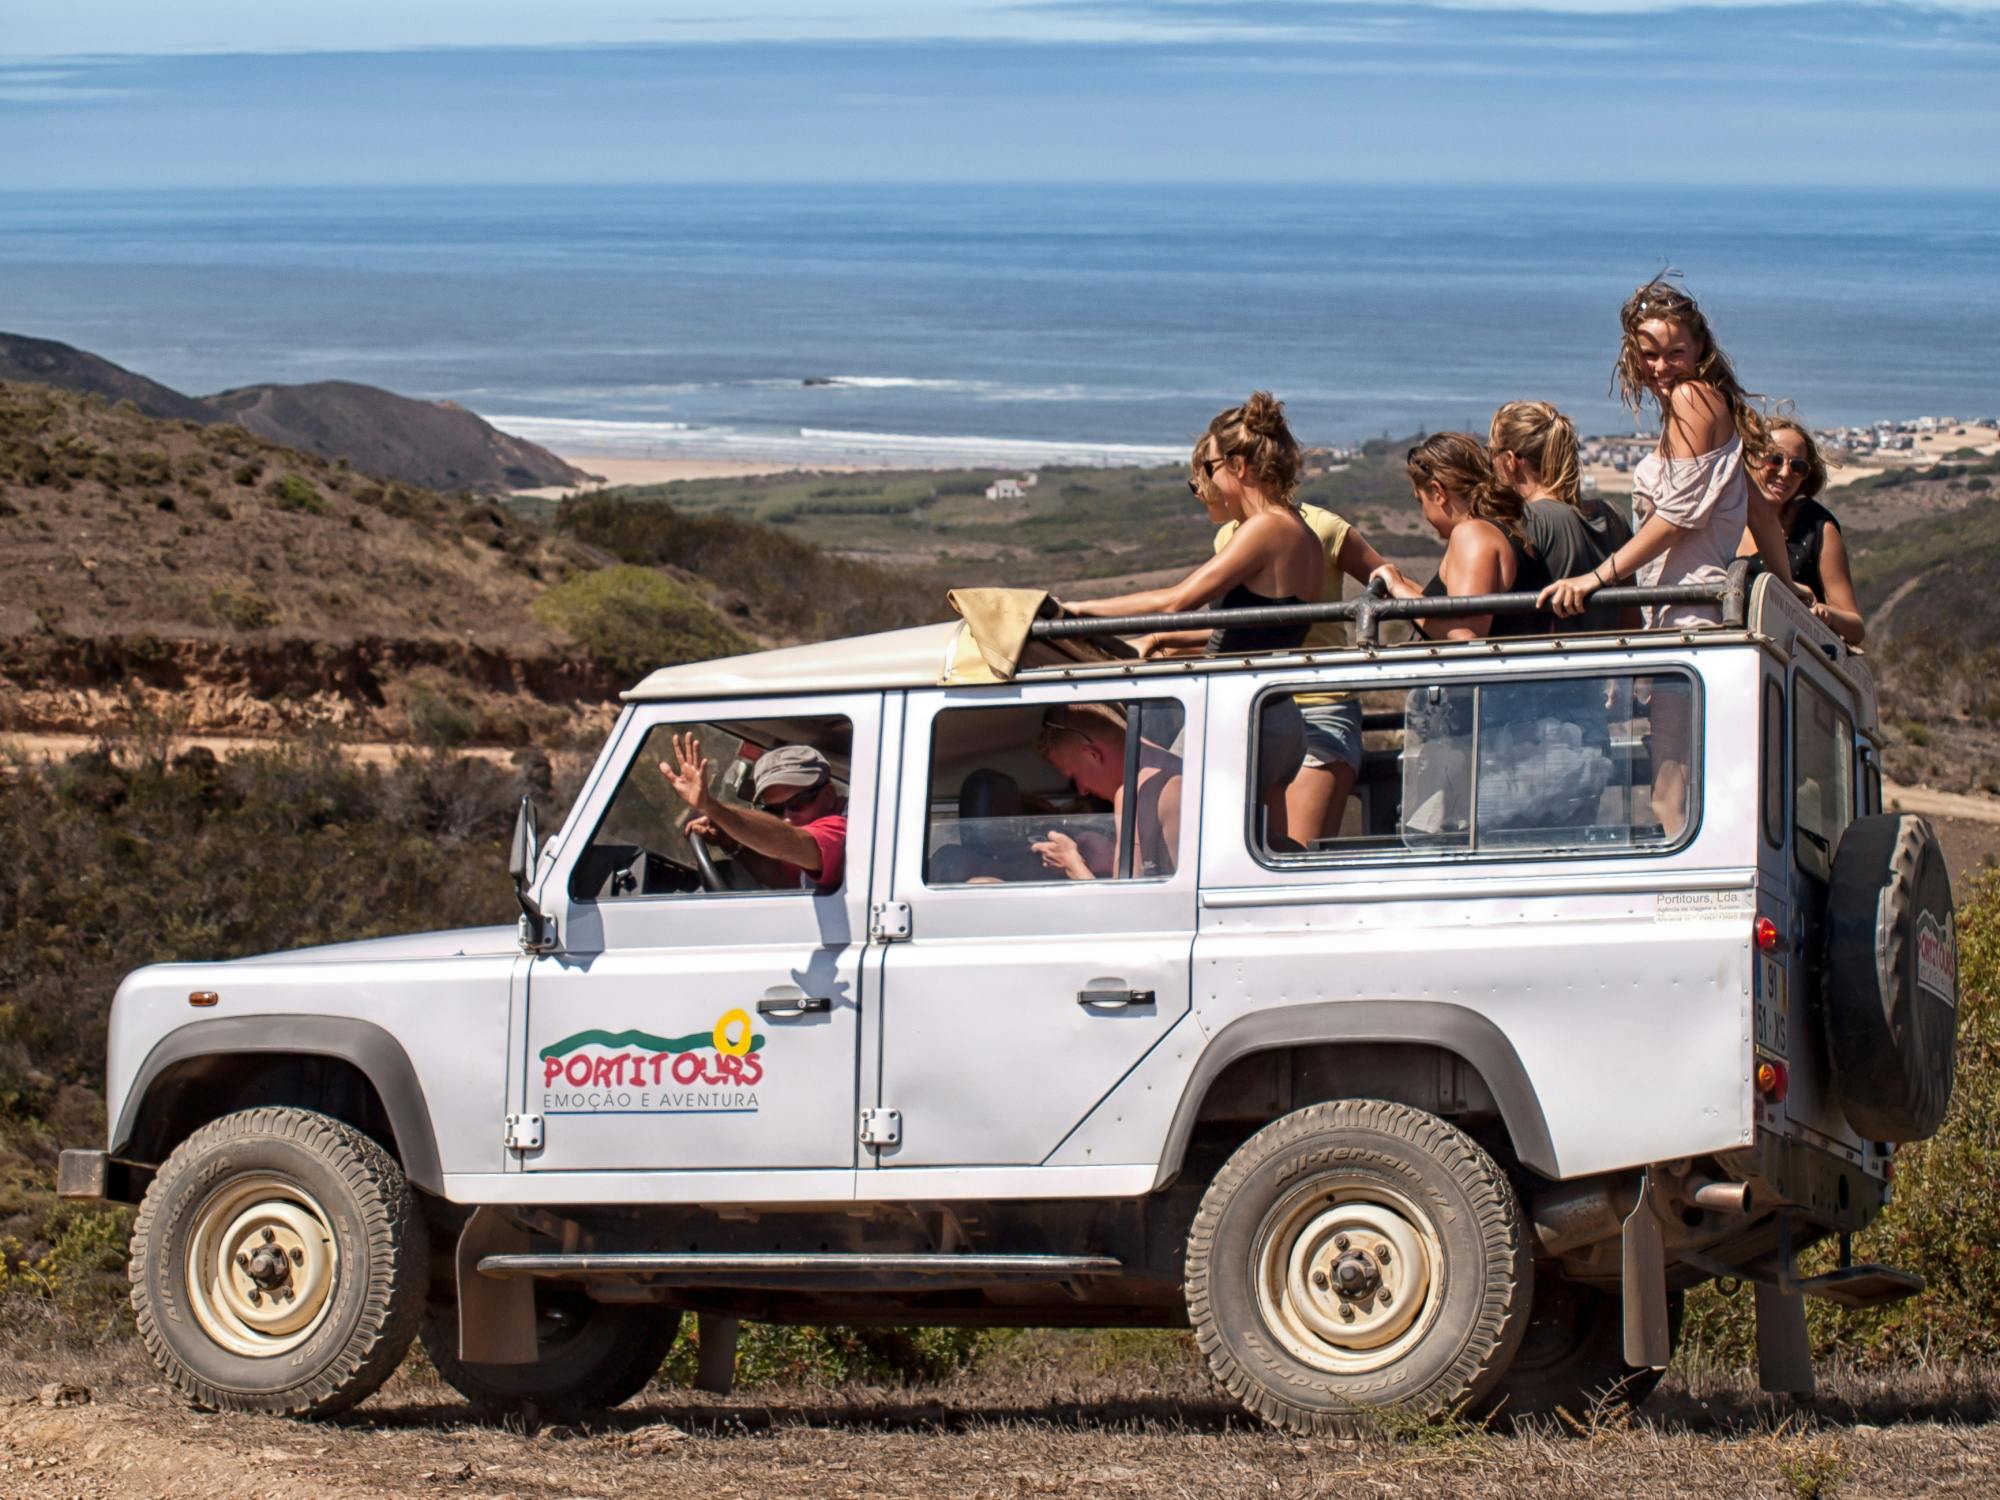 Wild West Coast full-day tour in the Algarve with pickup